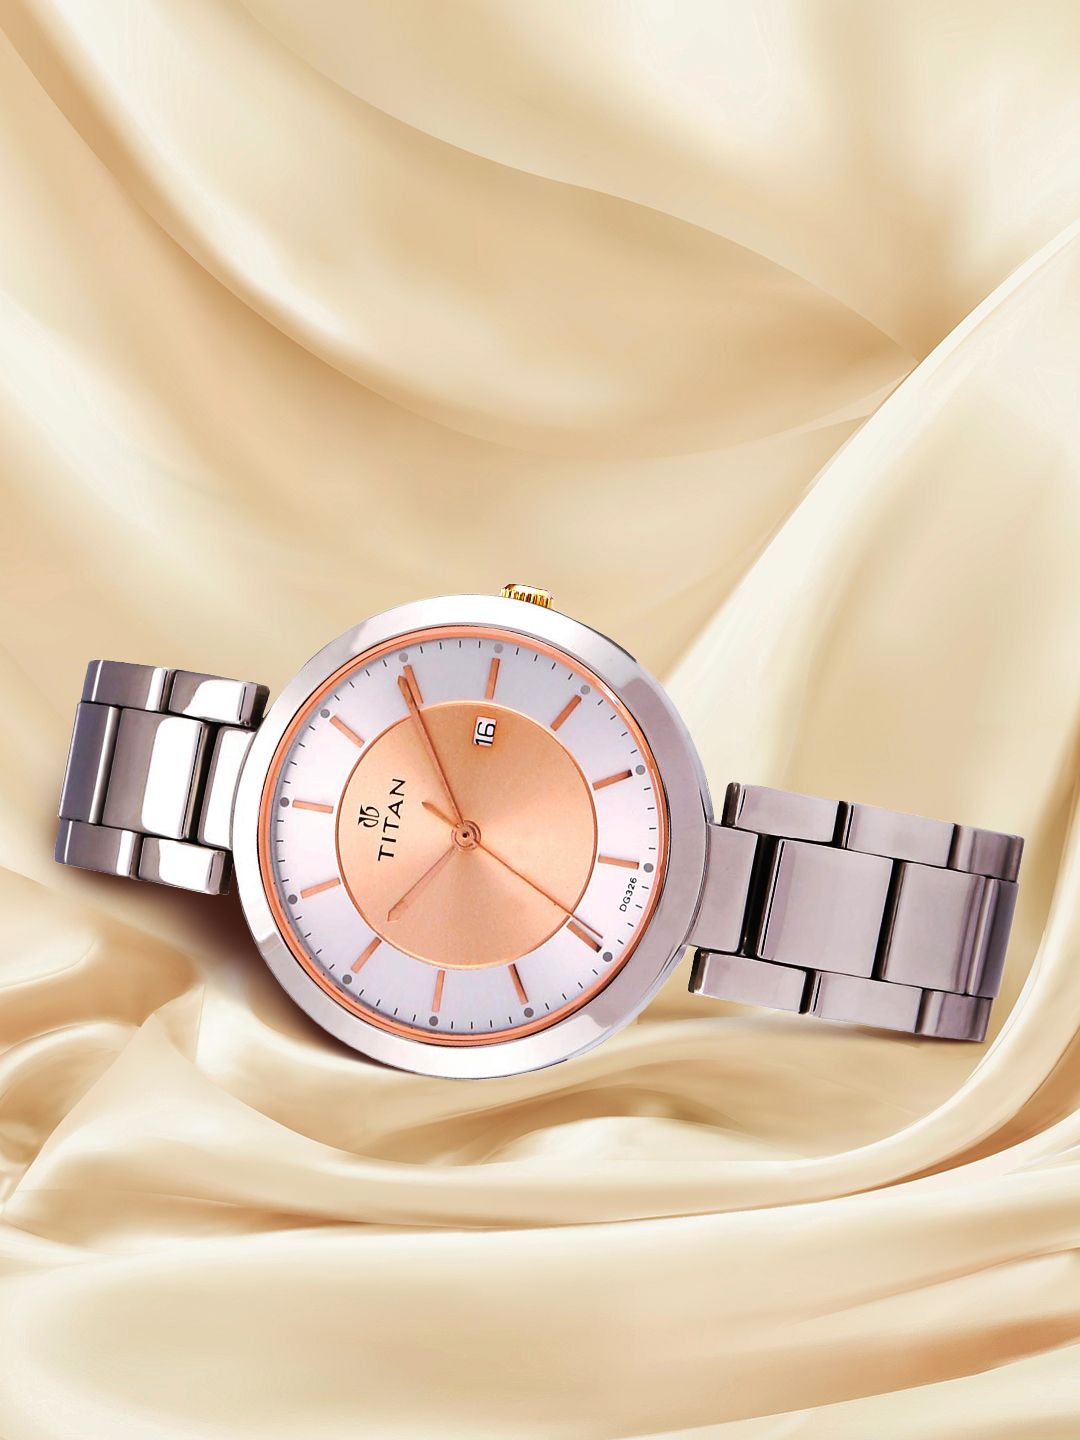 Titan Women Silver & Rose Gold-Toned Analogue Watch 2480KM01 Price in India